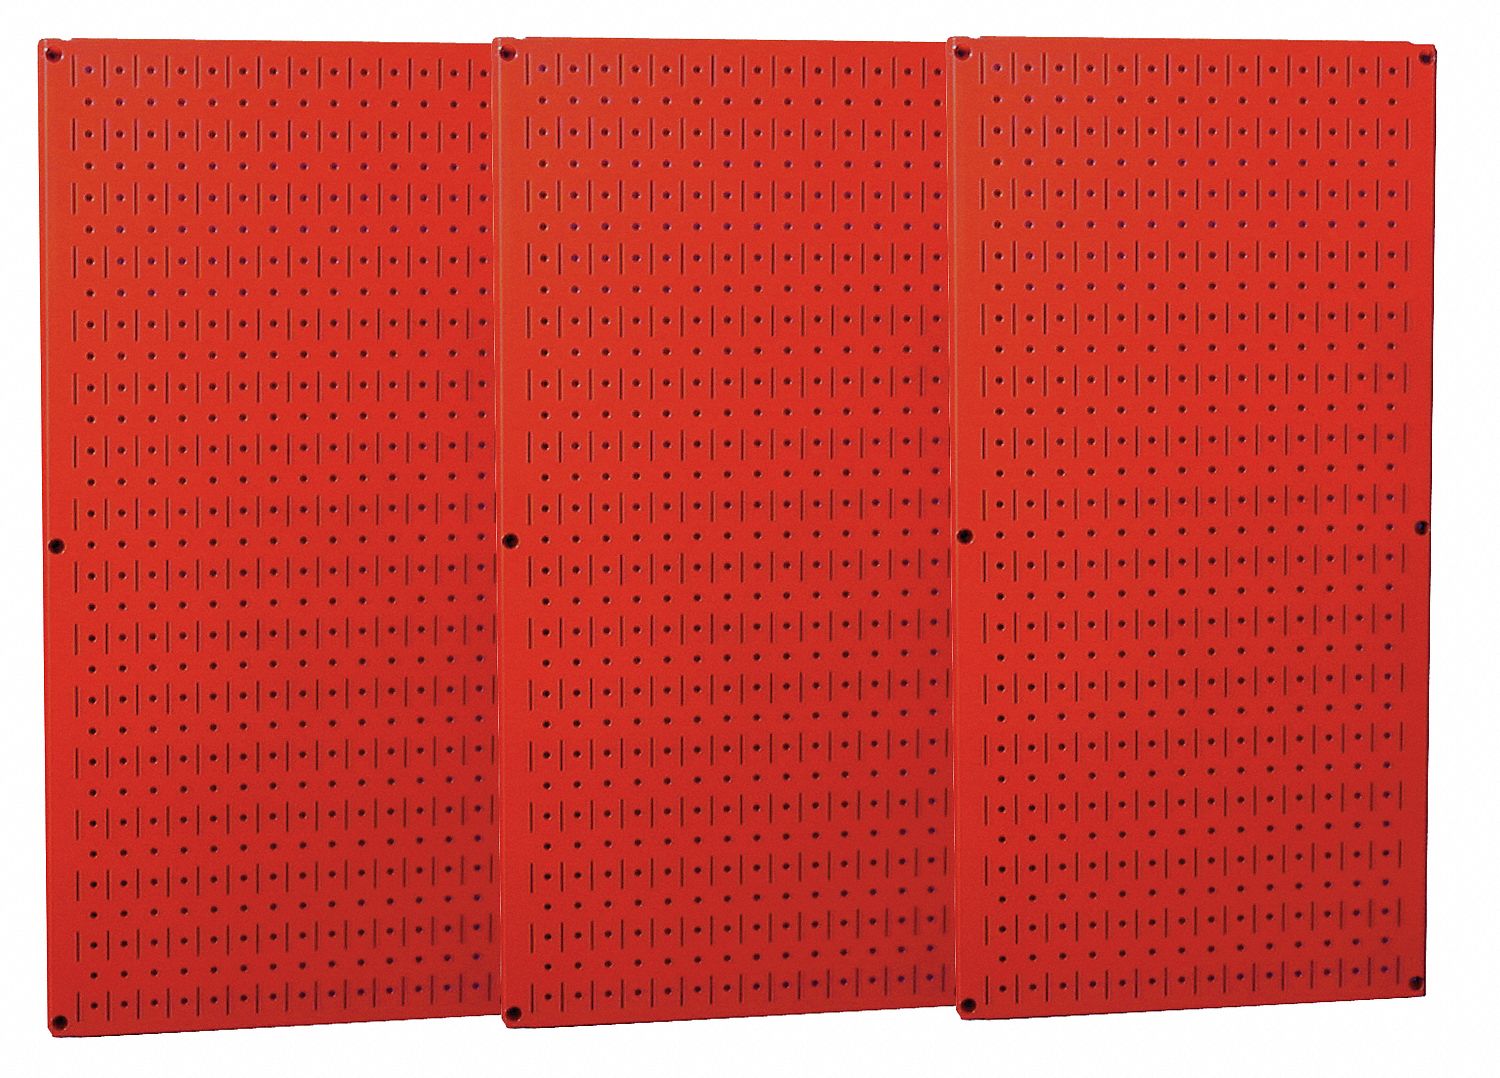 Grainger Approved 6yb63 Pegboard Tray for sale online 